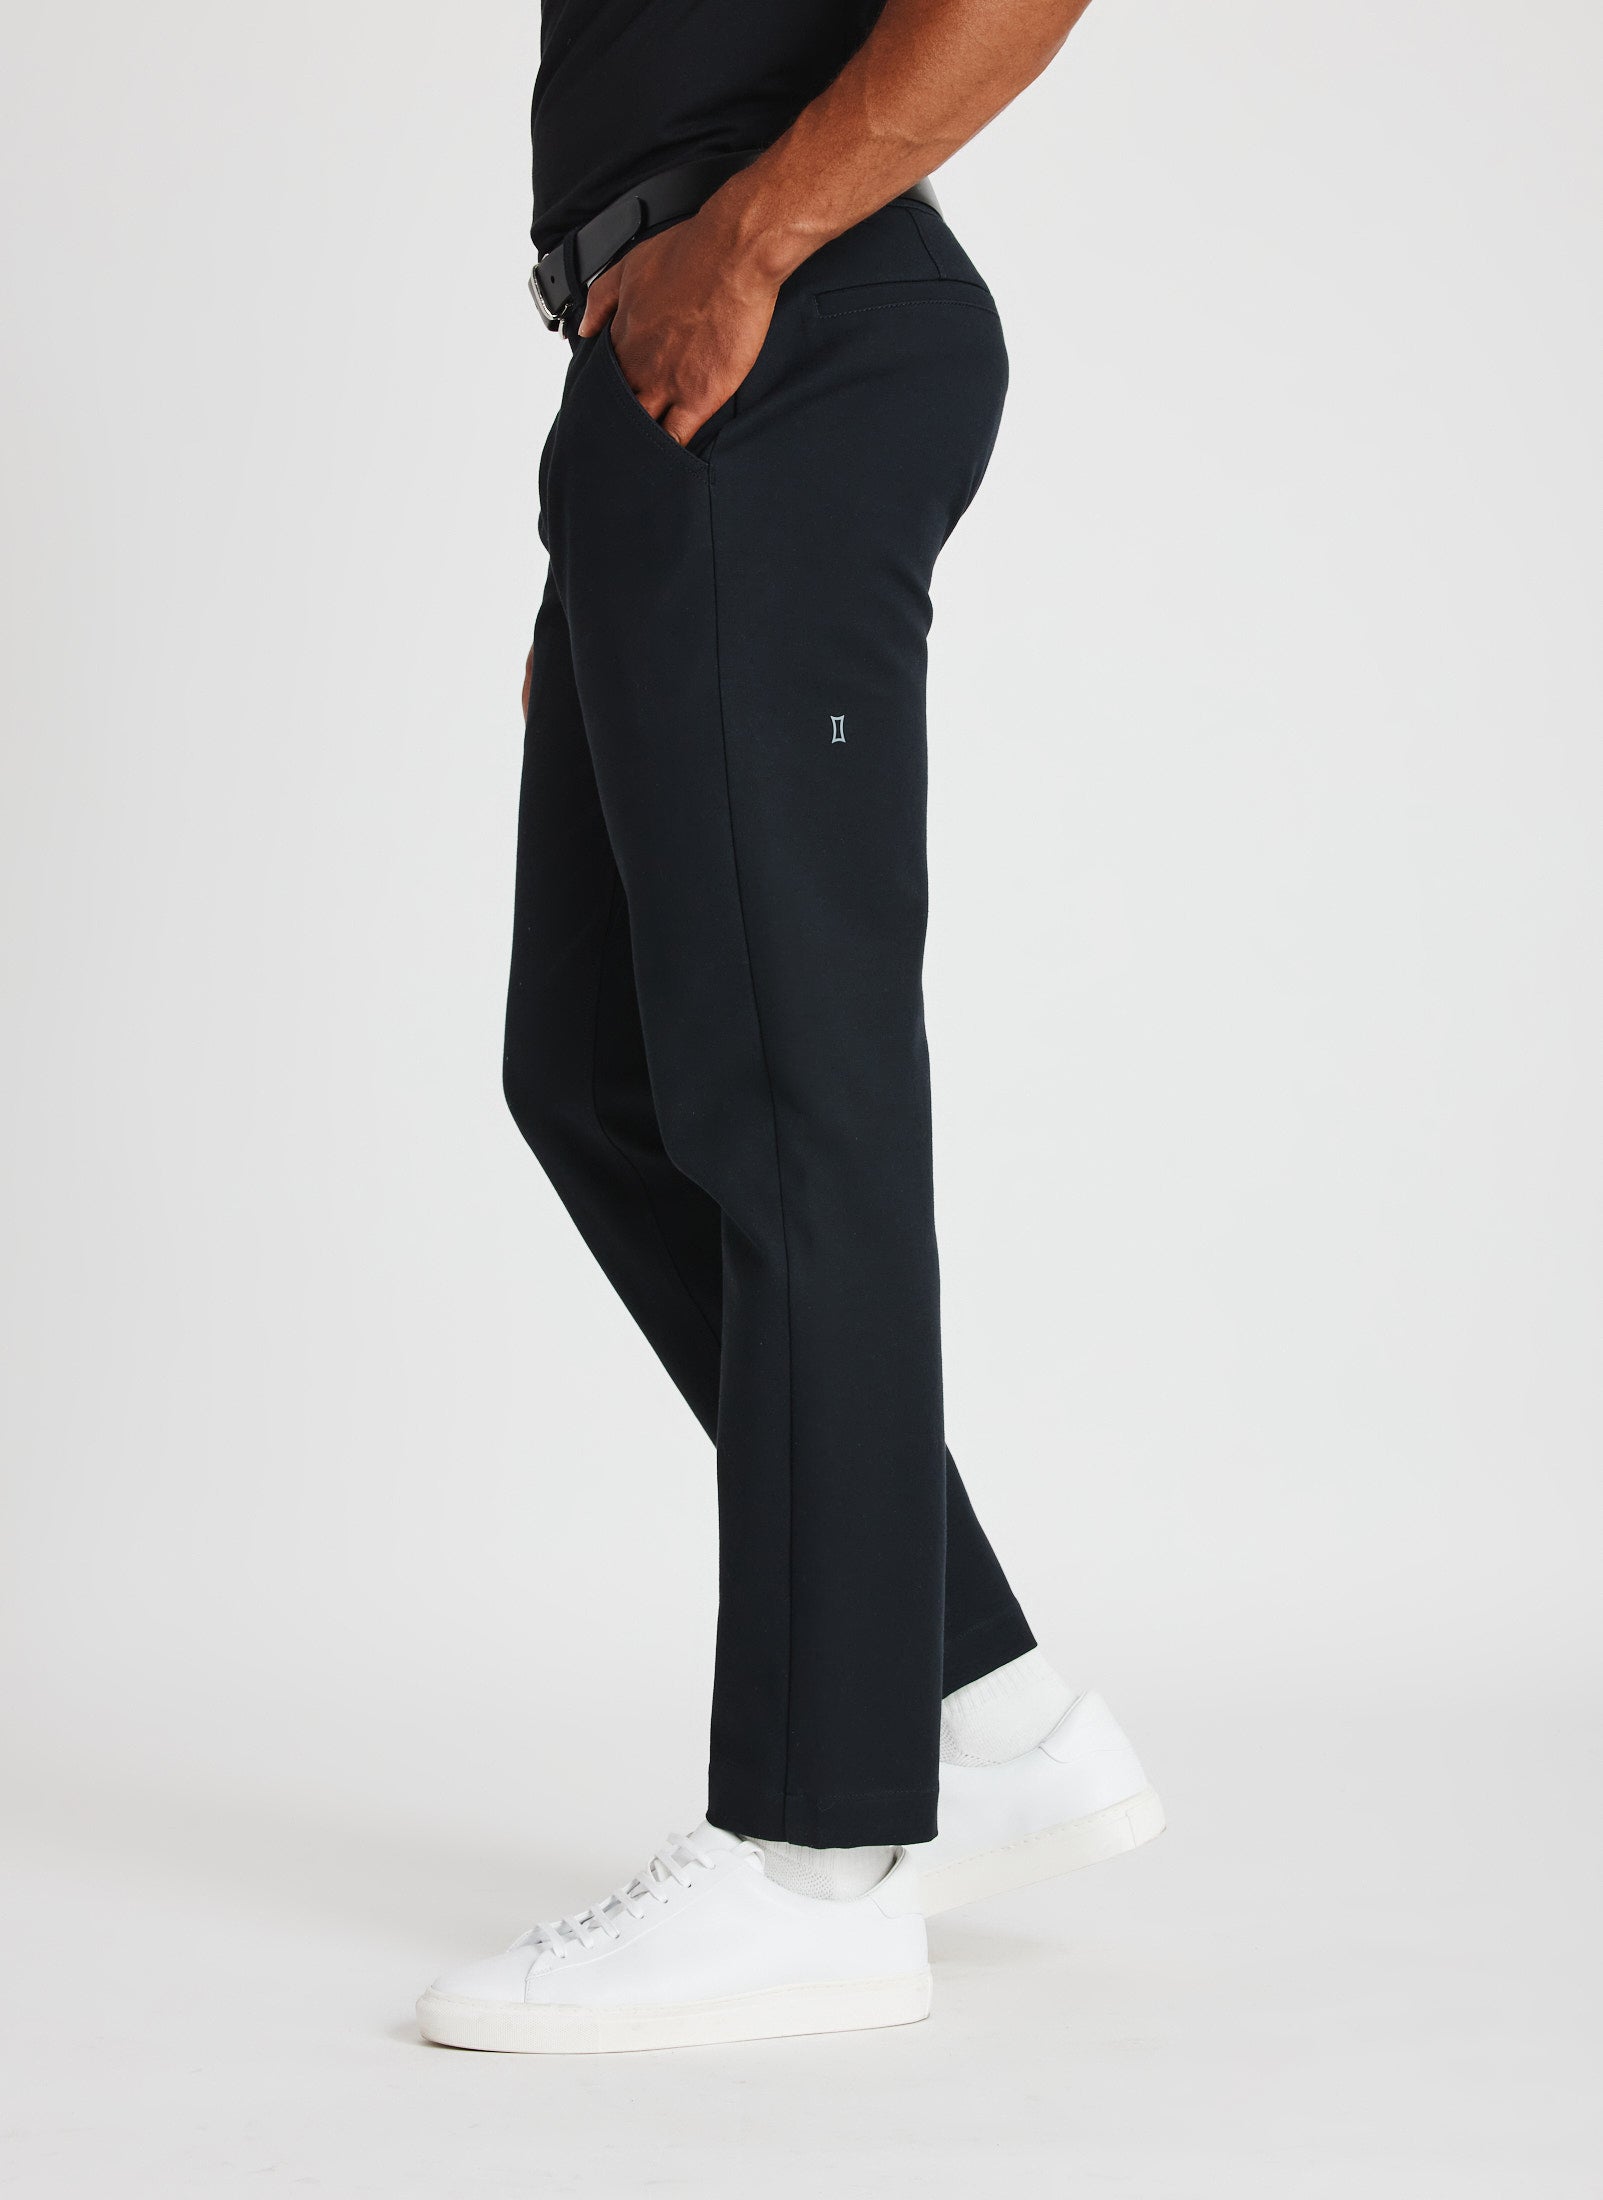 Kit and Ace — Sequoia Pants Standard Fit